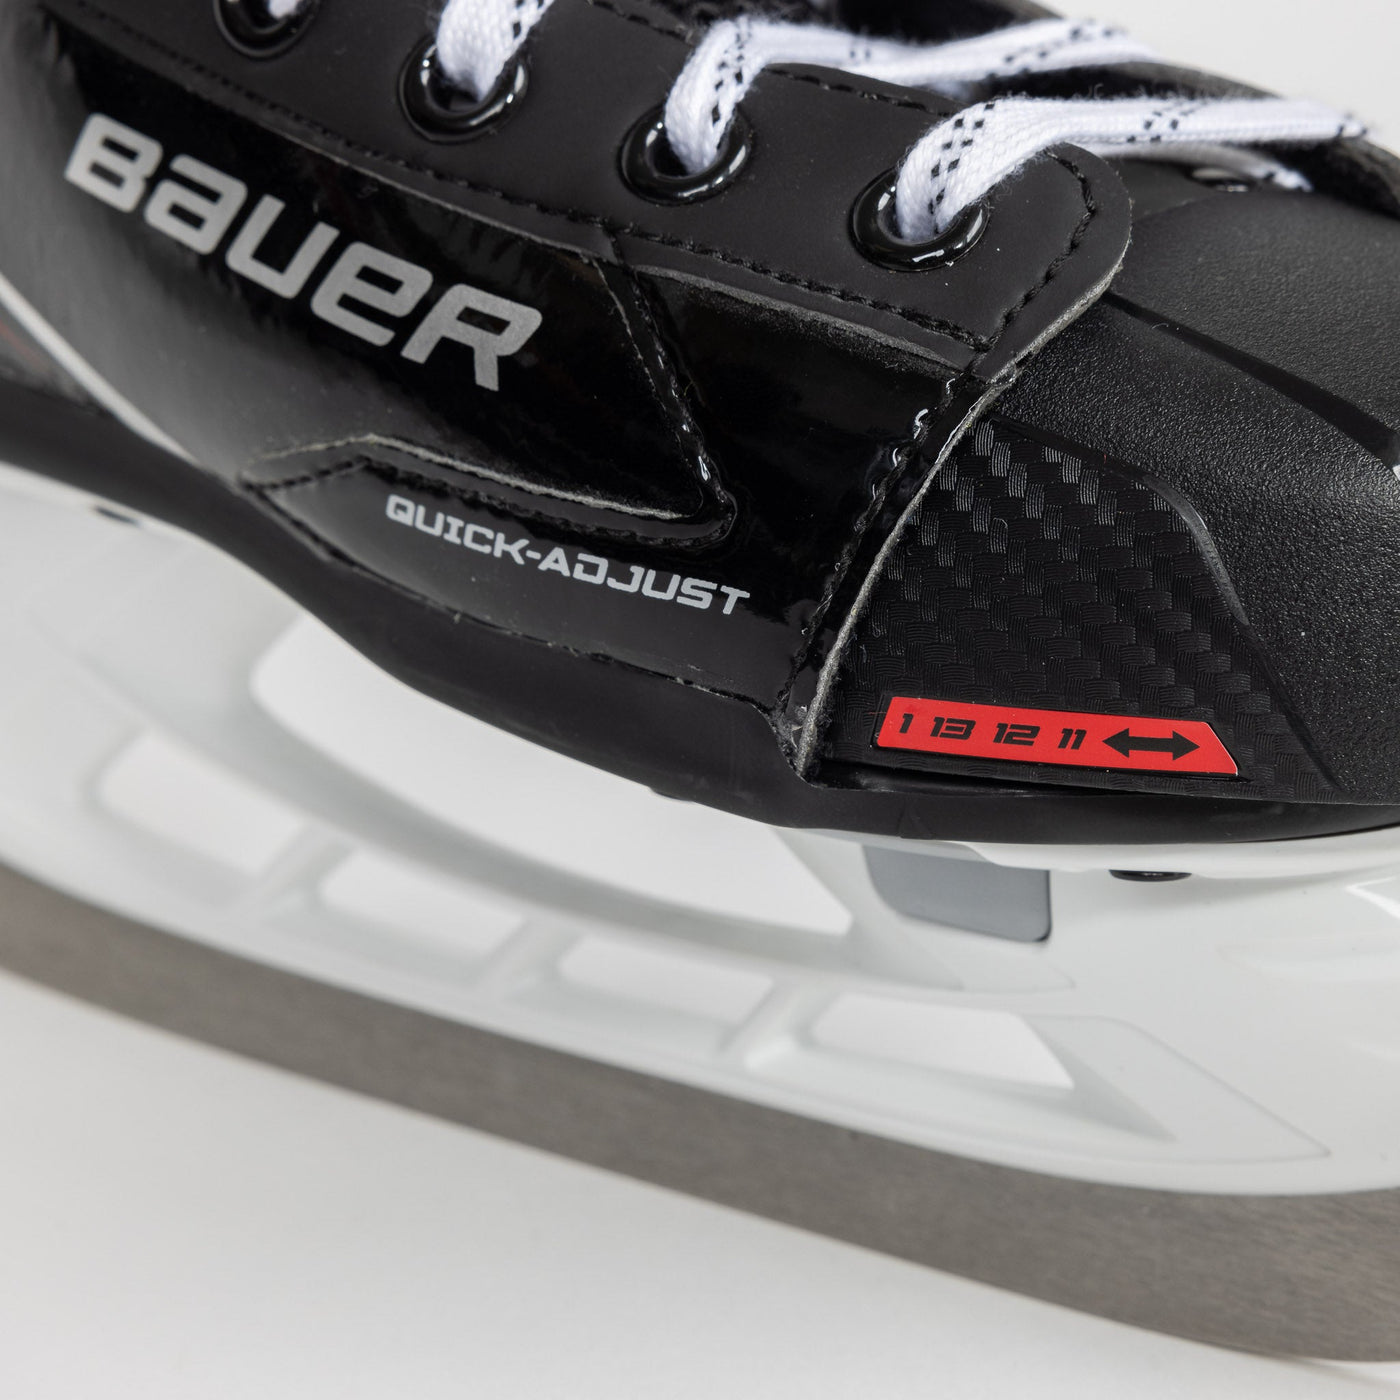 Bauer Lil Rookie Adjustable Junior Hockey Skate - The Hockey Shop Source For Sports